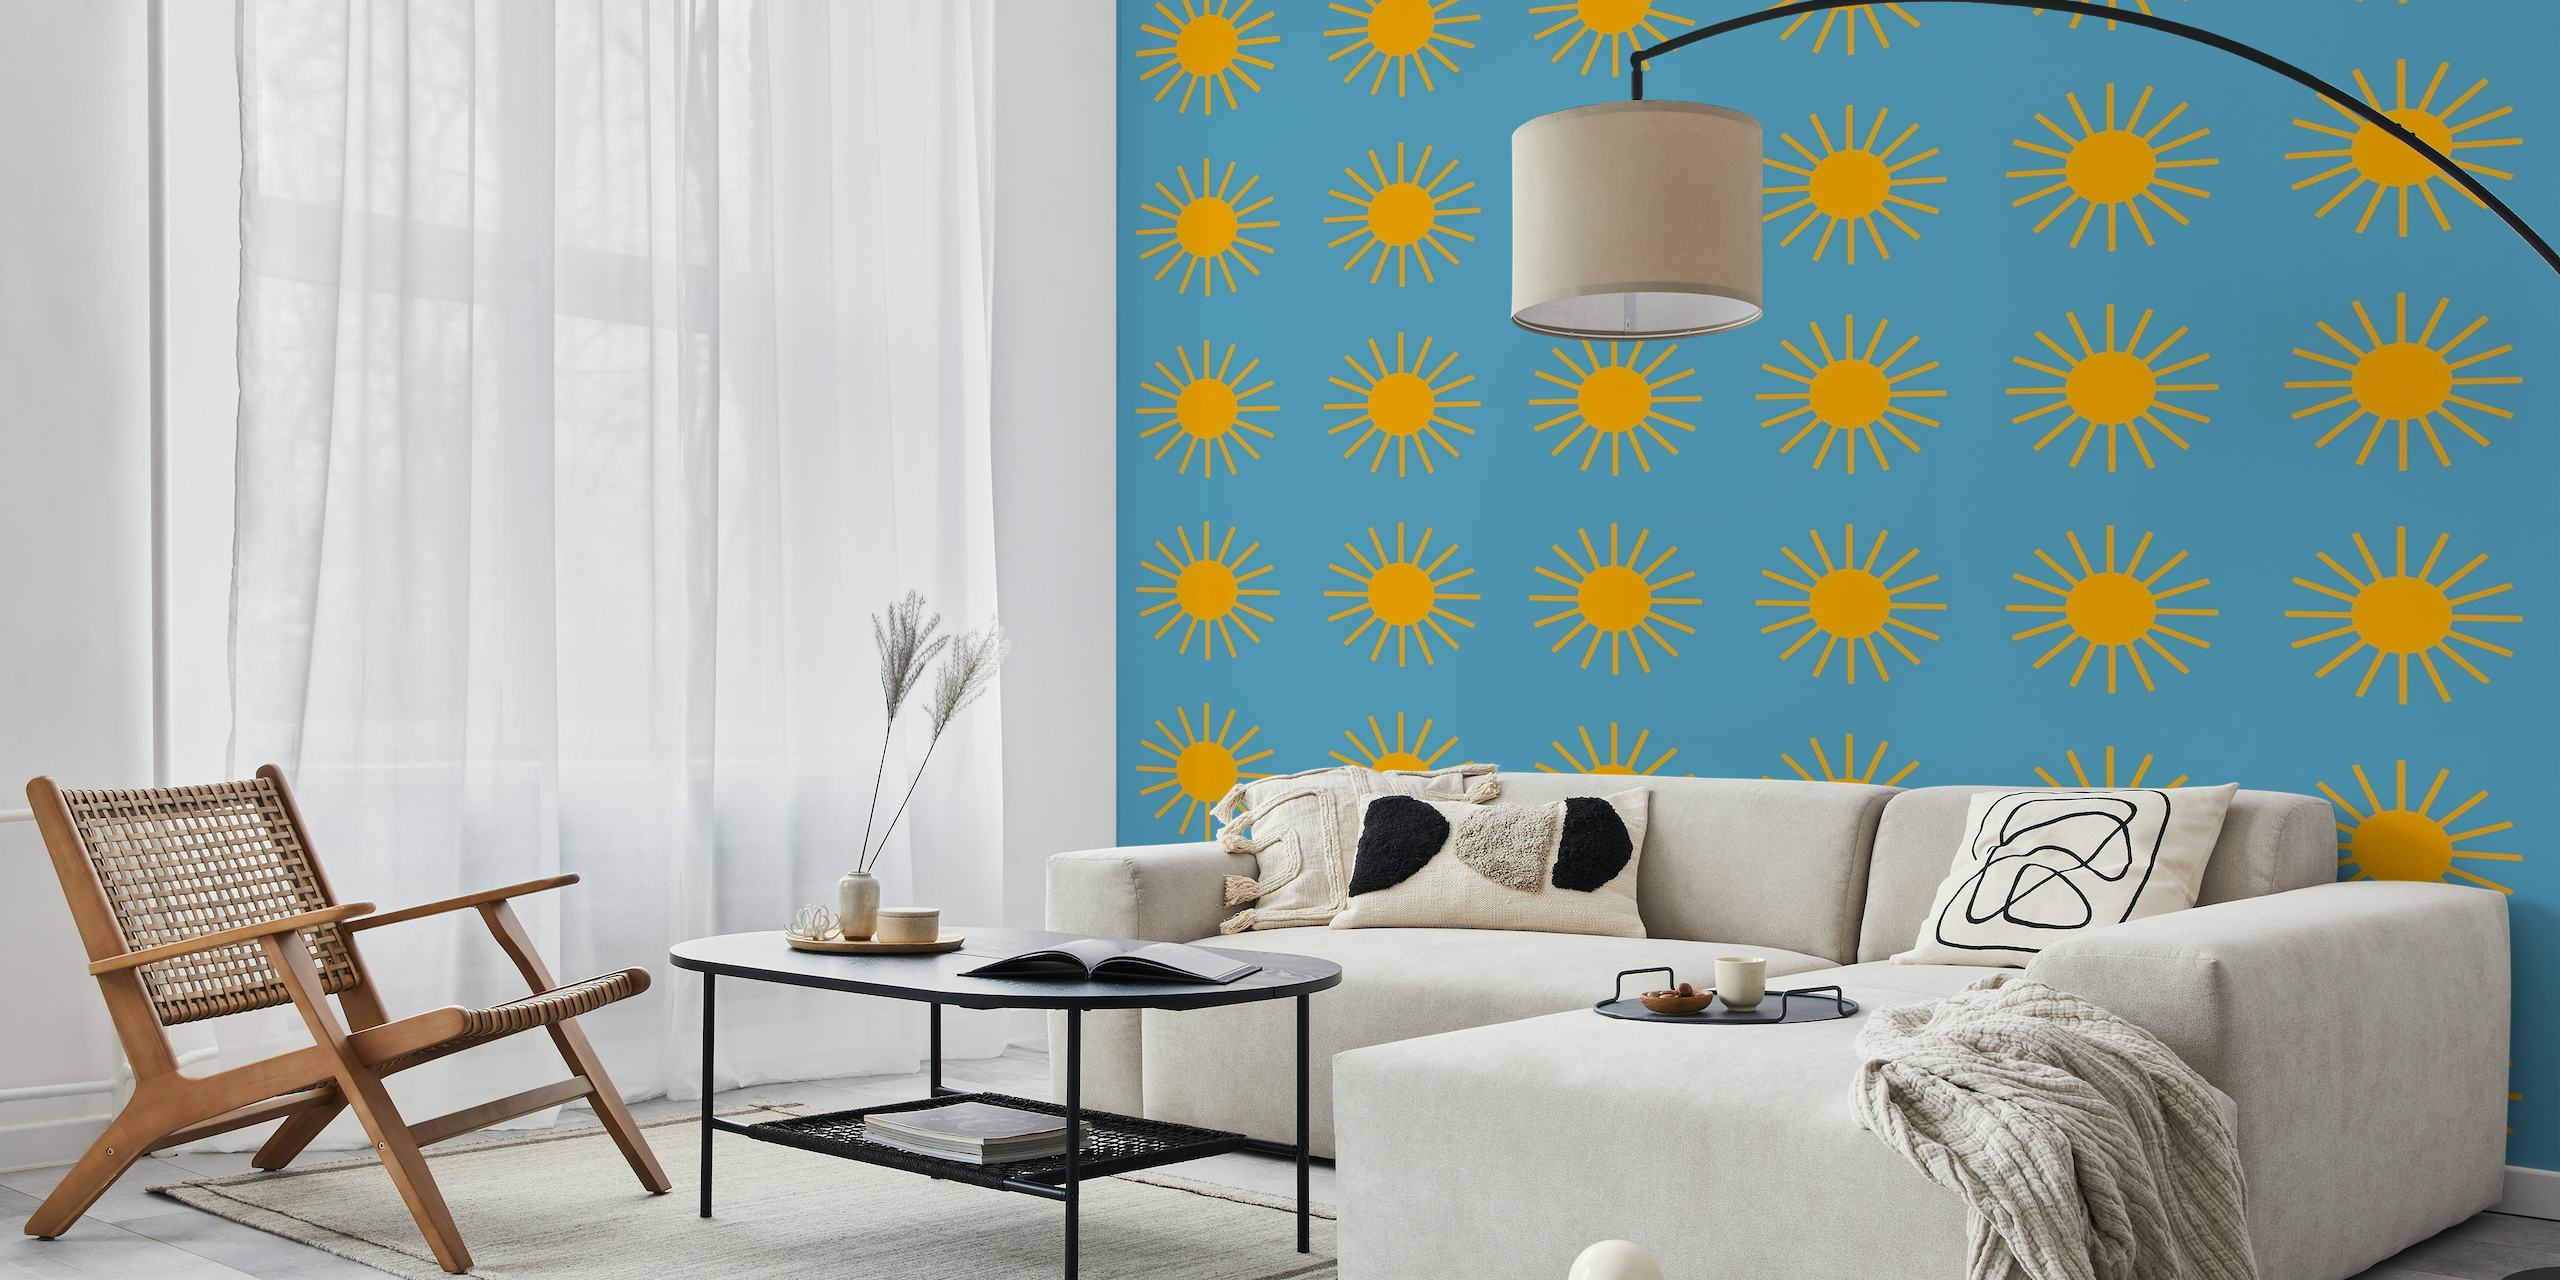 Bright suns pattern on blue background wall mural